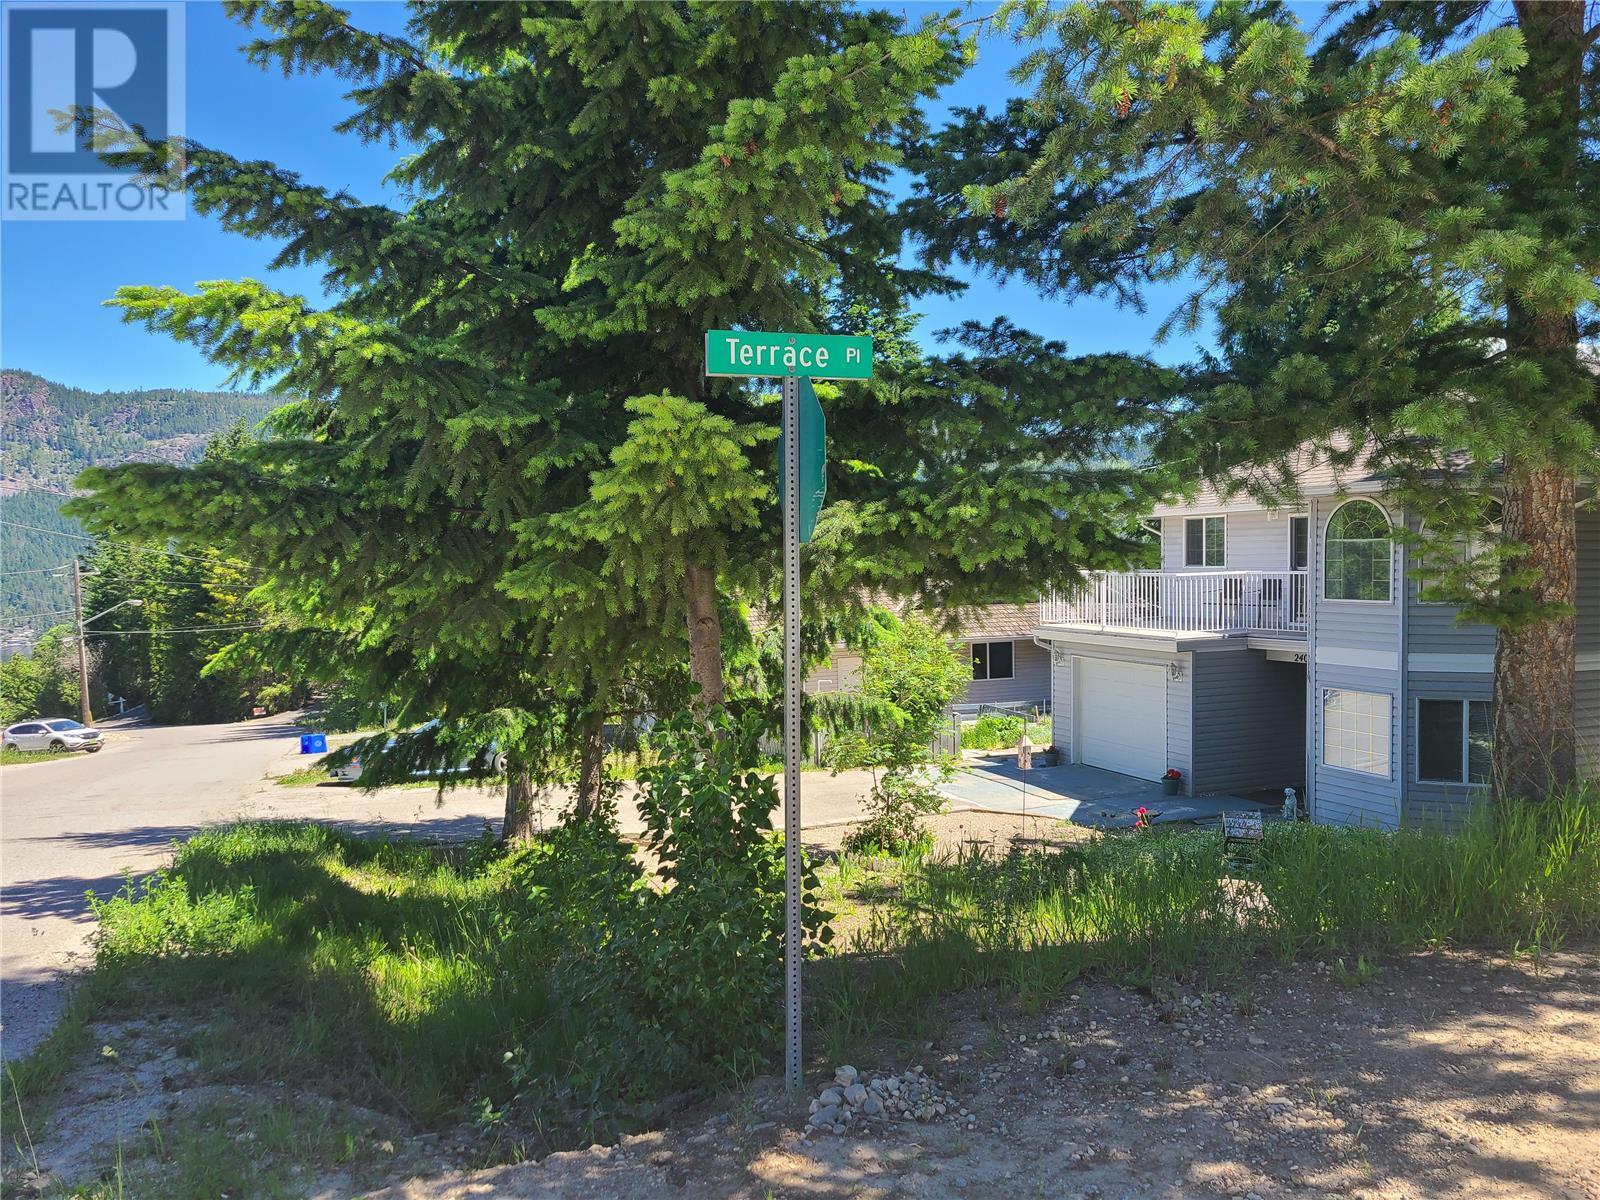 Lot 62 Terrace Place located in Blind Bay, British Columbia